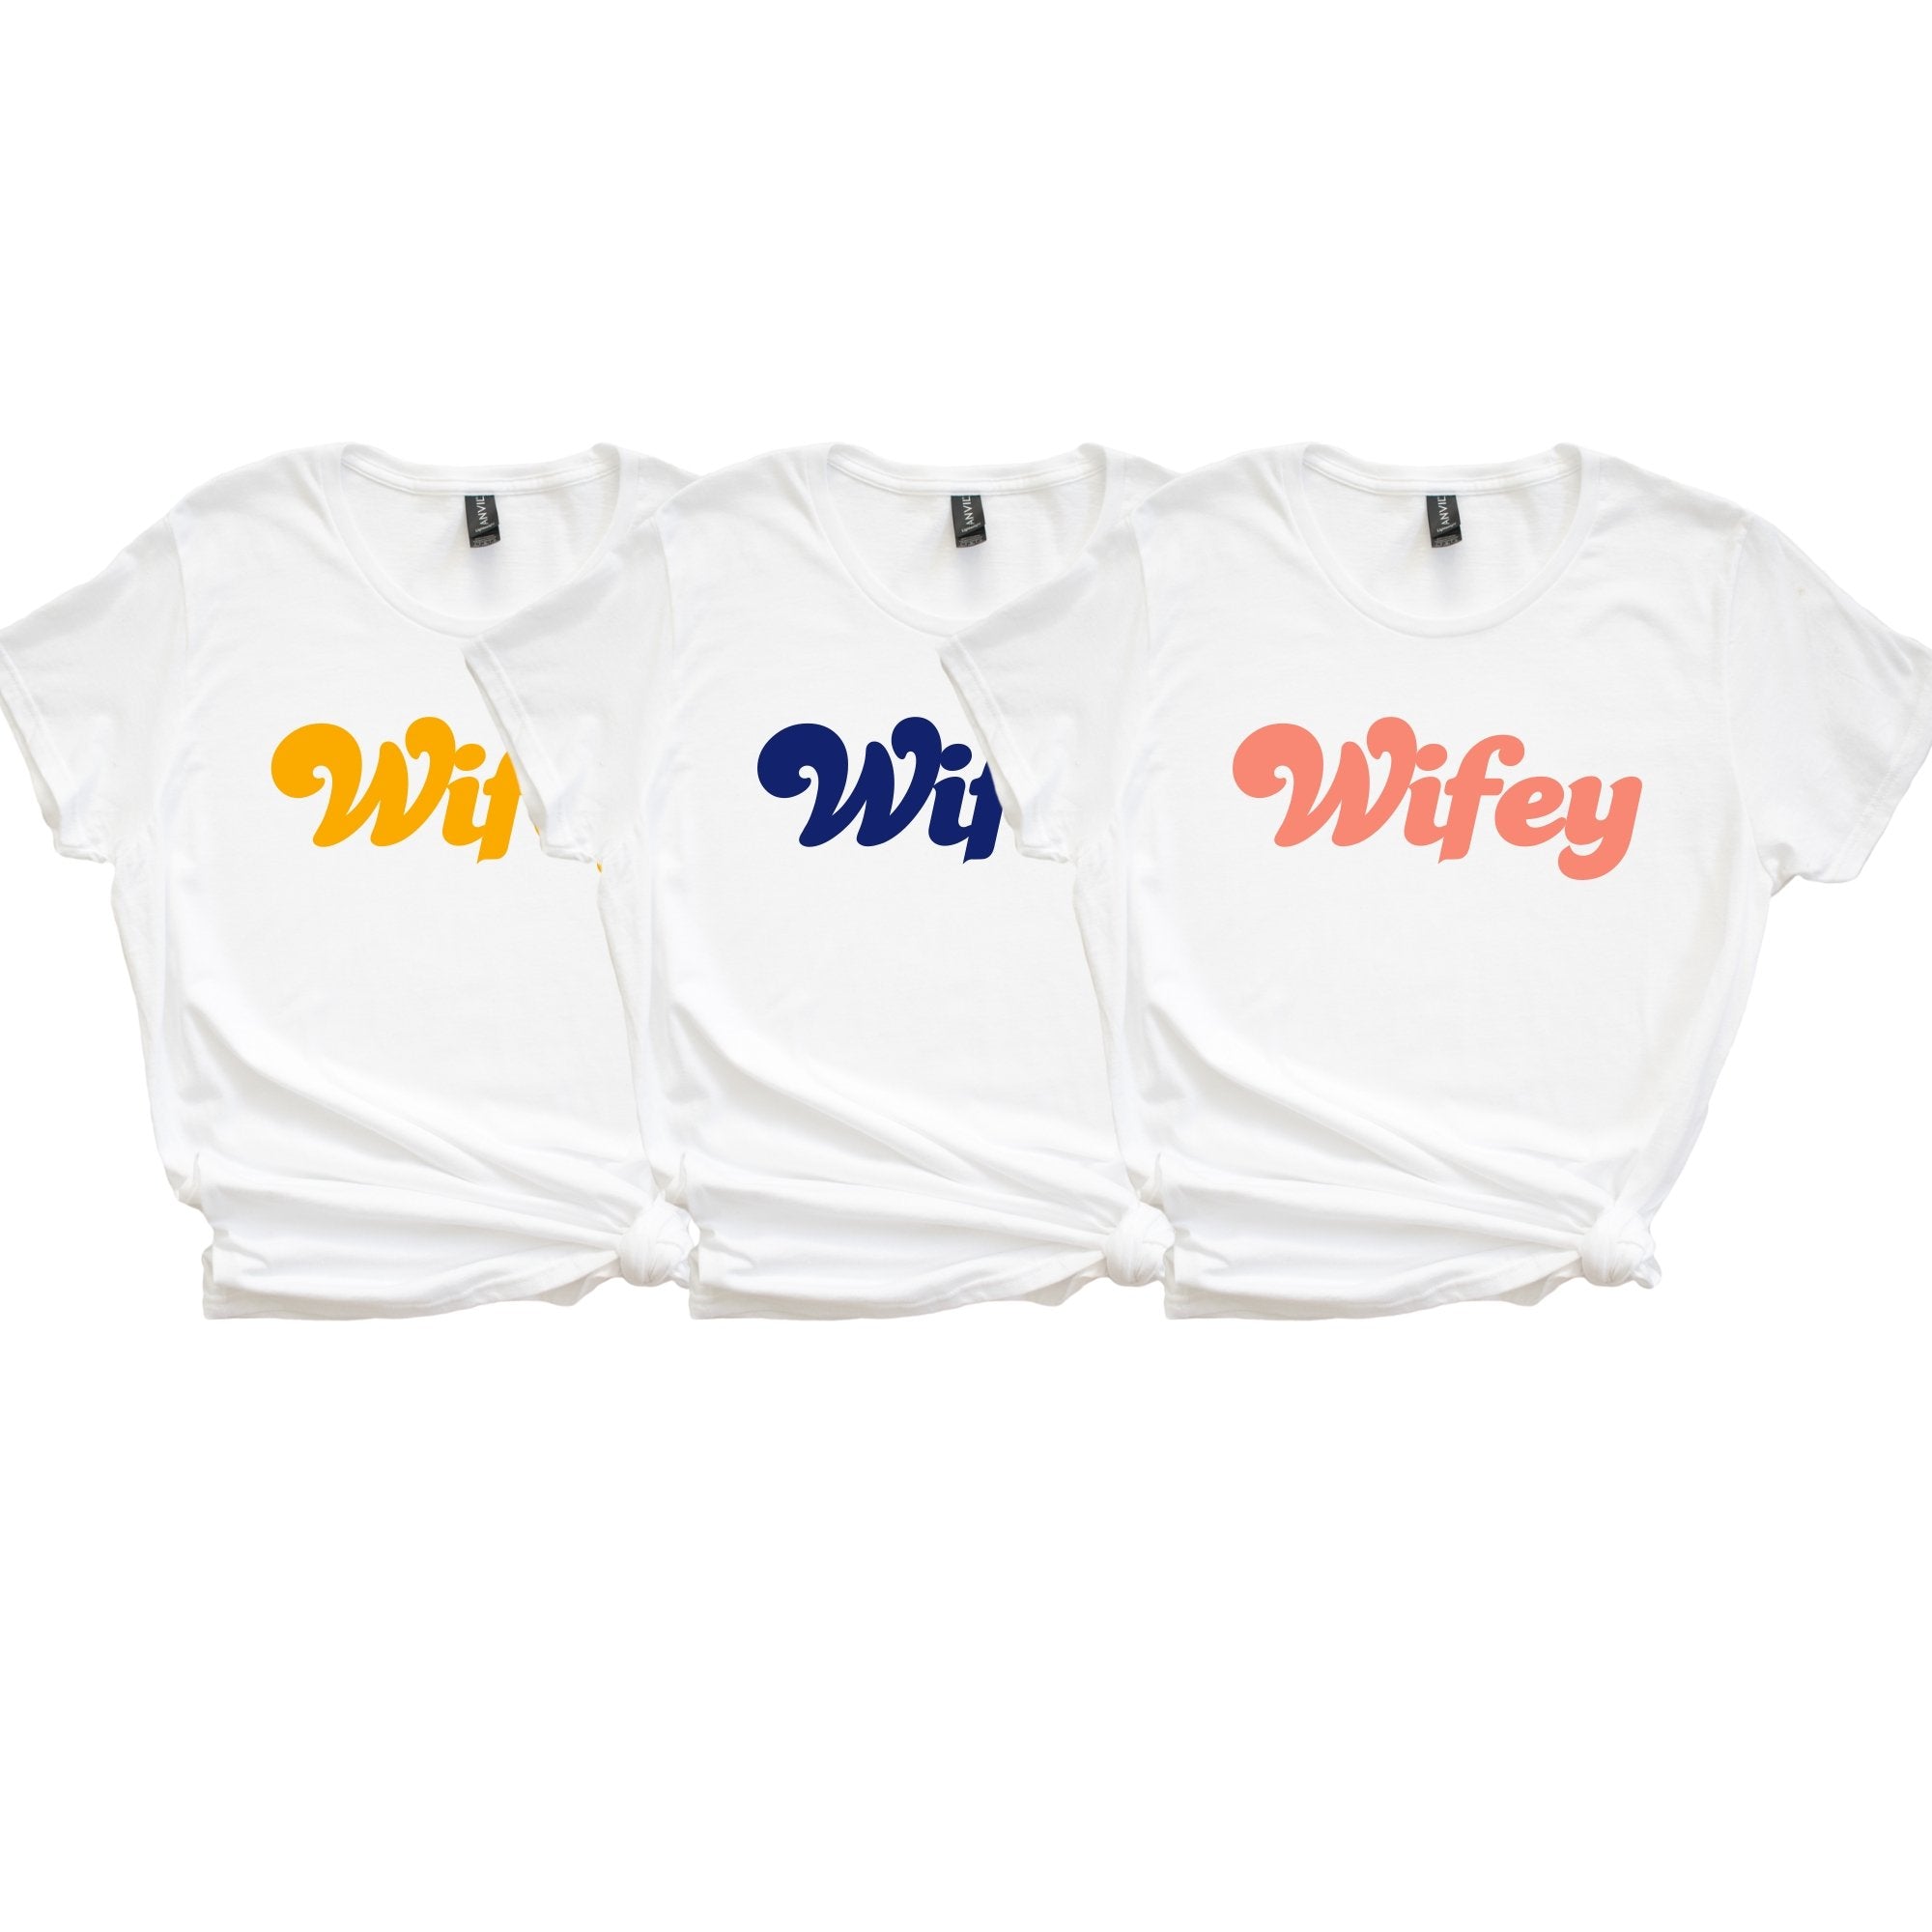 A white shirt is customized with "Wifey" in black.